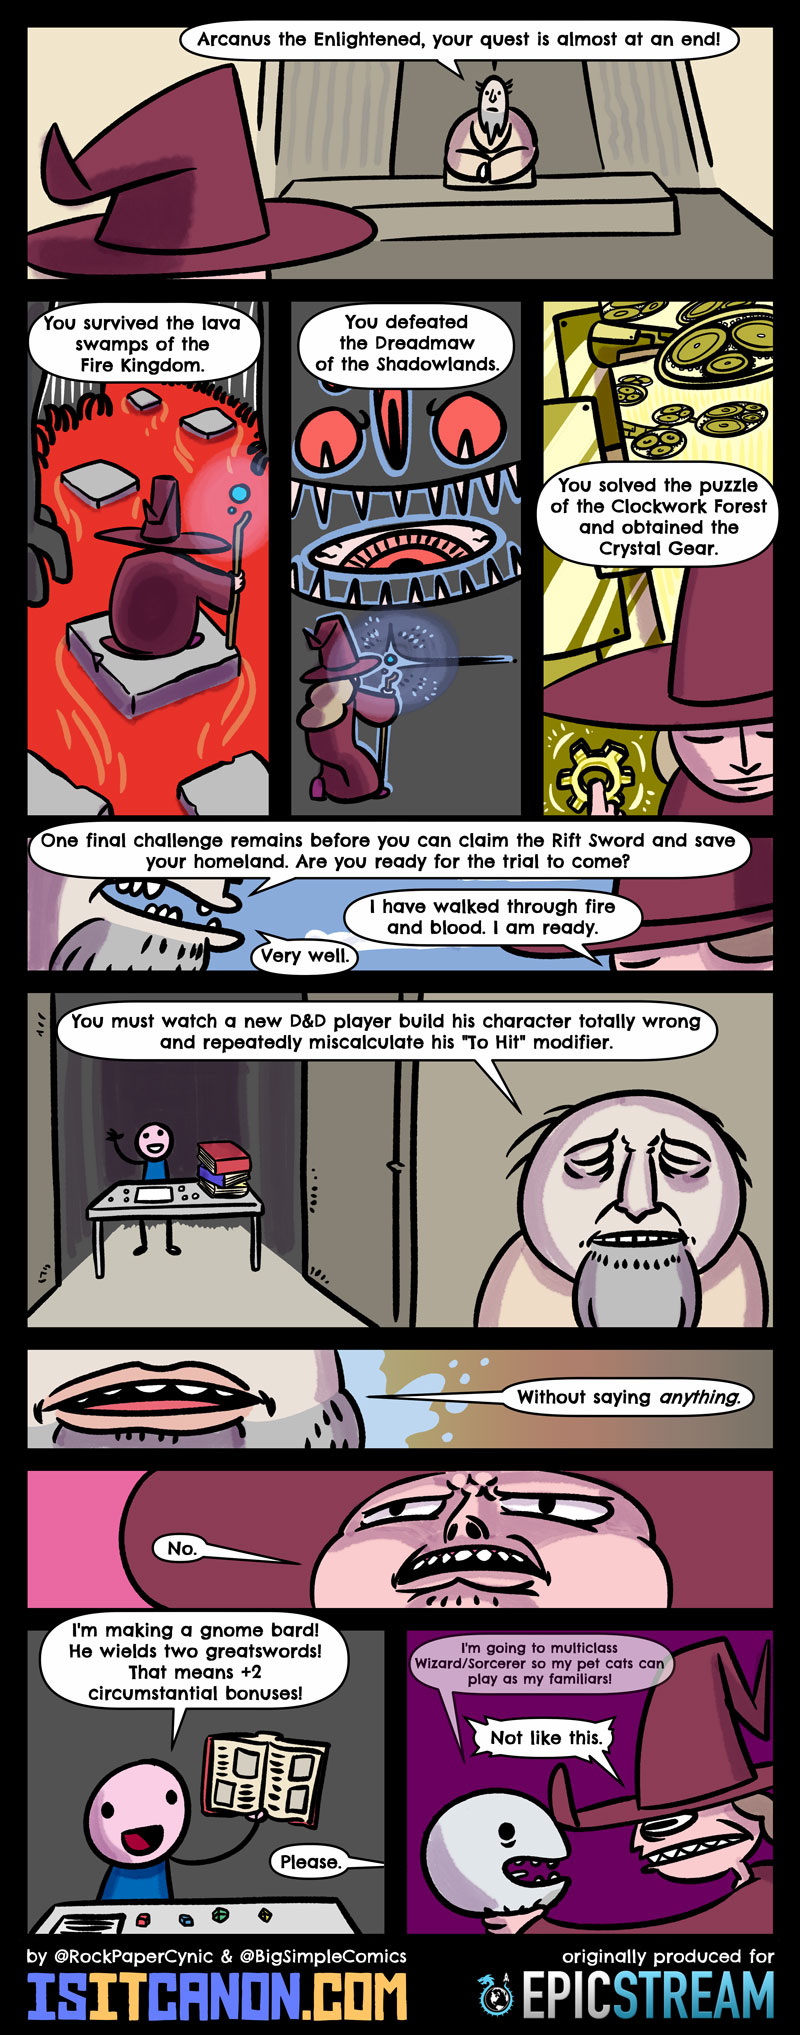 In this comic, we see a hero face the most difficult trial that any hero could possibly face in Dungeons & Dragons.